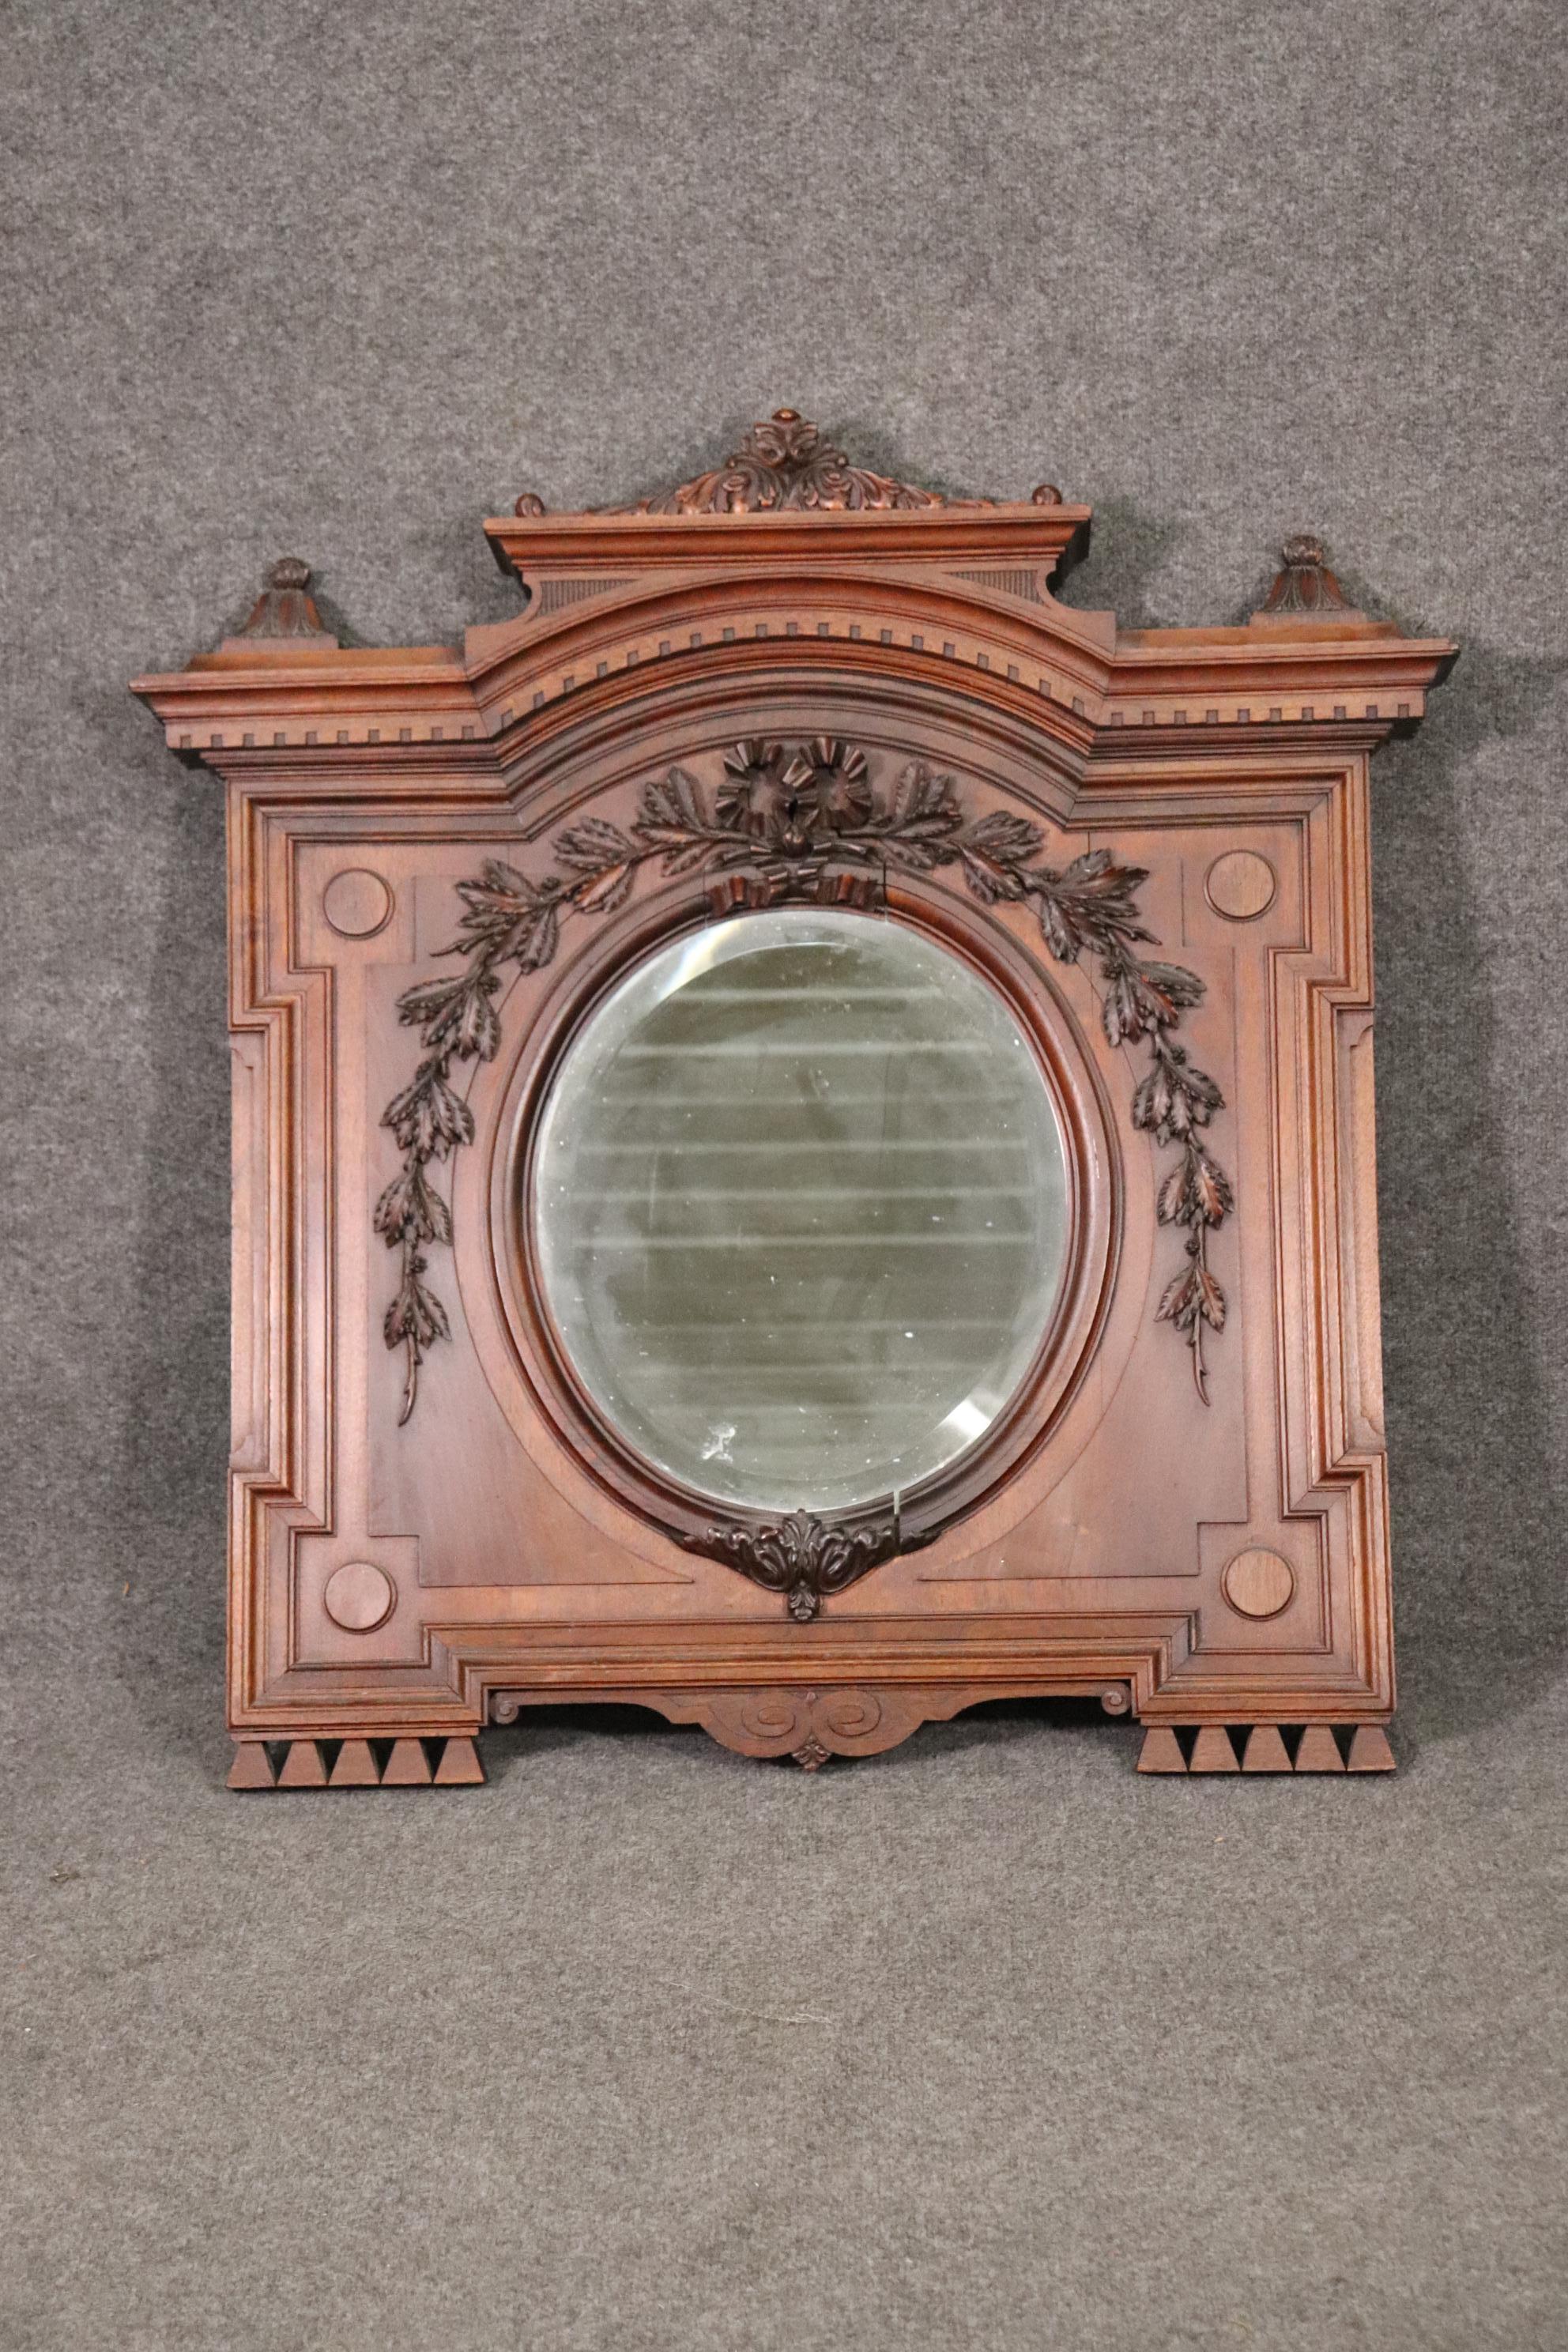 This is a gorgeous smaller, squarish mirror for certain spaces on certain walls in certain rooms. This mirror has phenomenal carved details and is quite beautiful for such a compact design. The mirror measures approximately 39 tall x 38 wide x 5 and